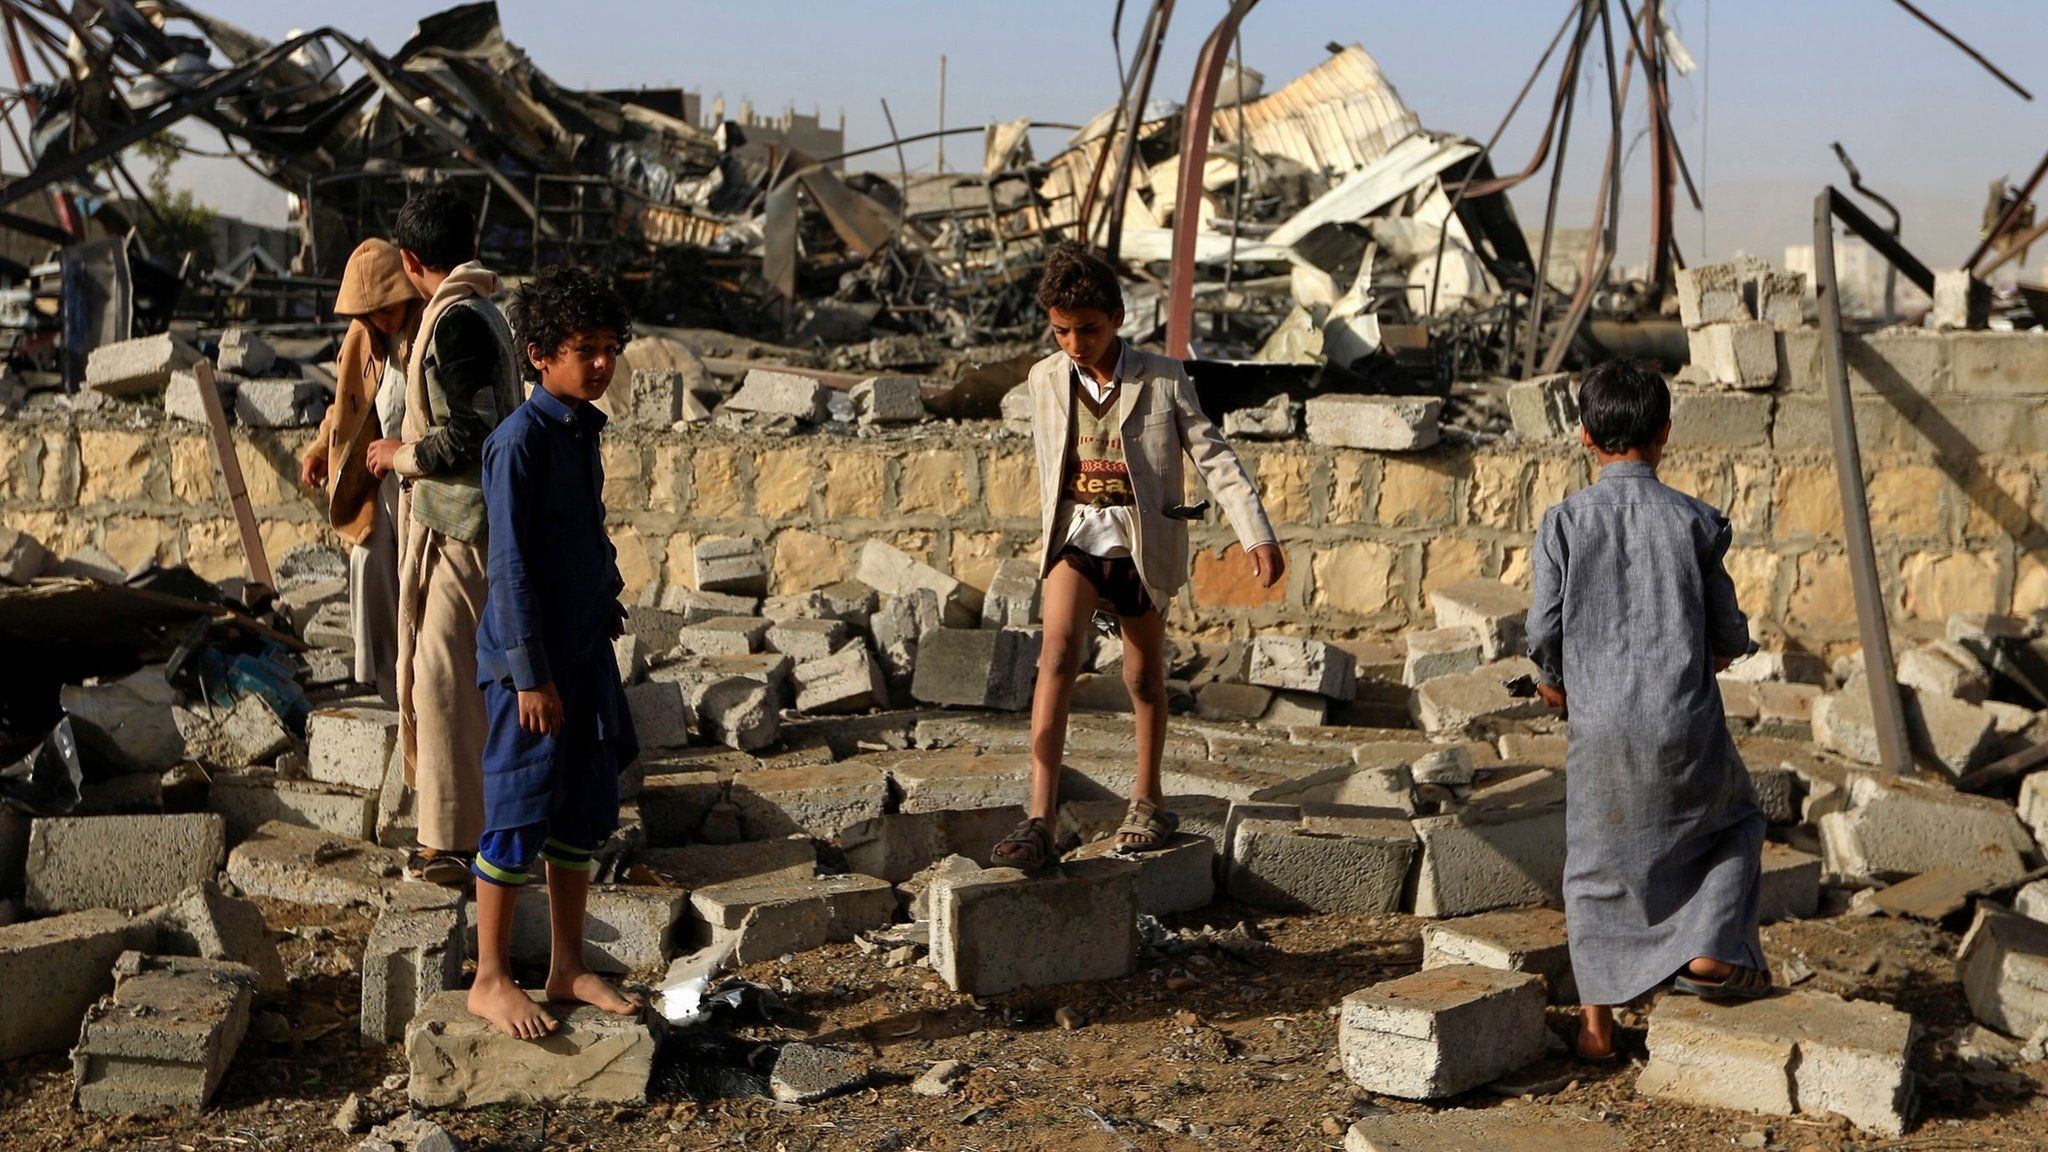 Children collect metal from the site of a destroyed factory following a reported airstrike by Saudi-led coalition in Sanaa, Yemen (20 January 2019)